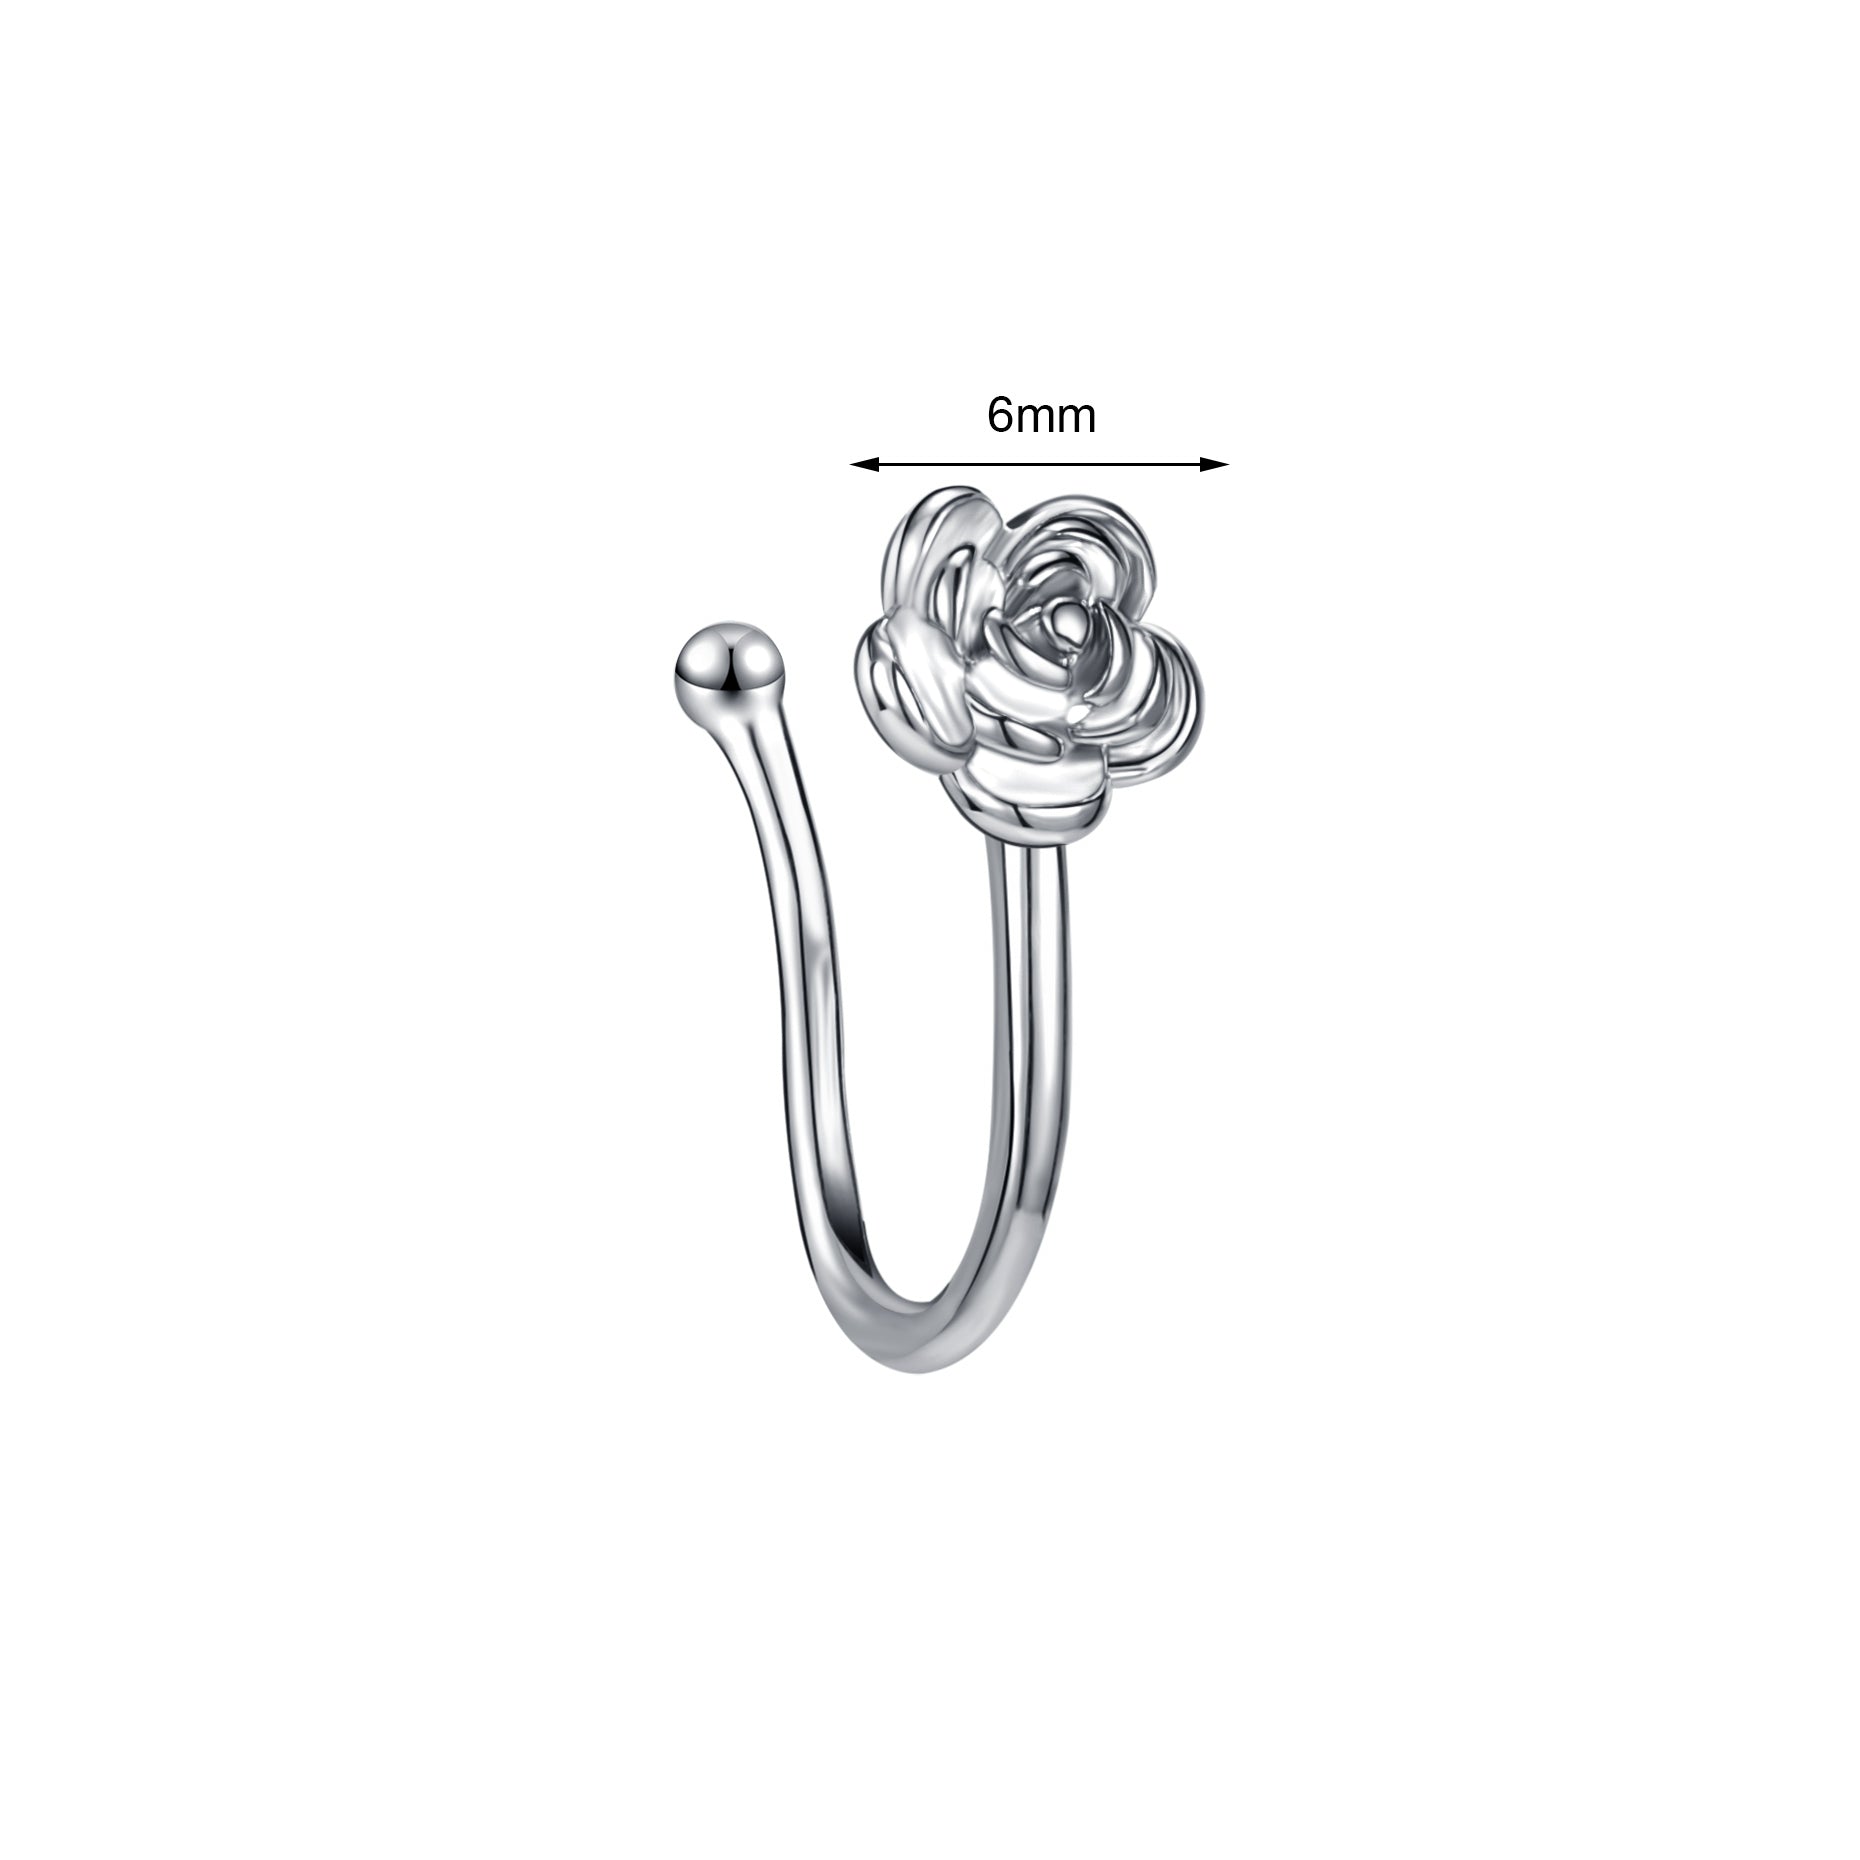 zs-flower-u-shaped-nose-clip-simple-stainless-steel-fake-nose-ring